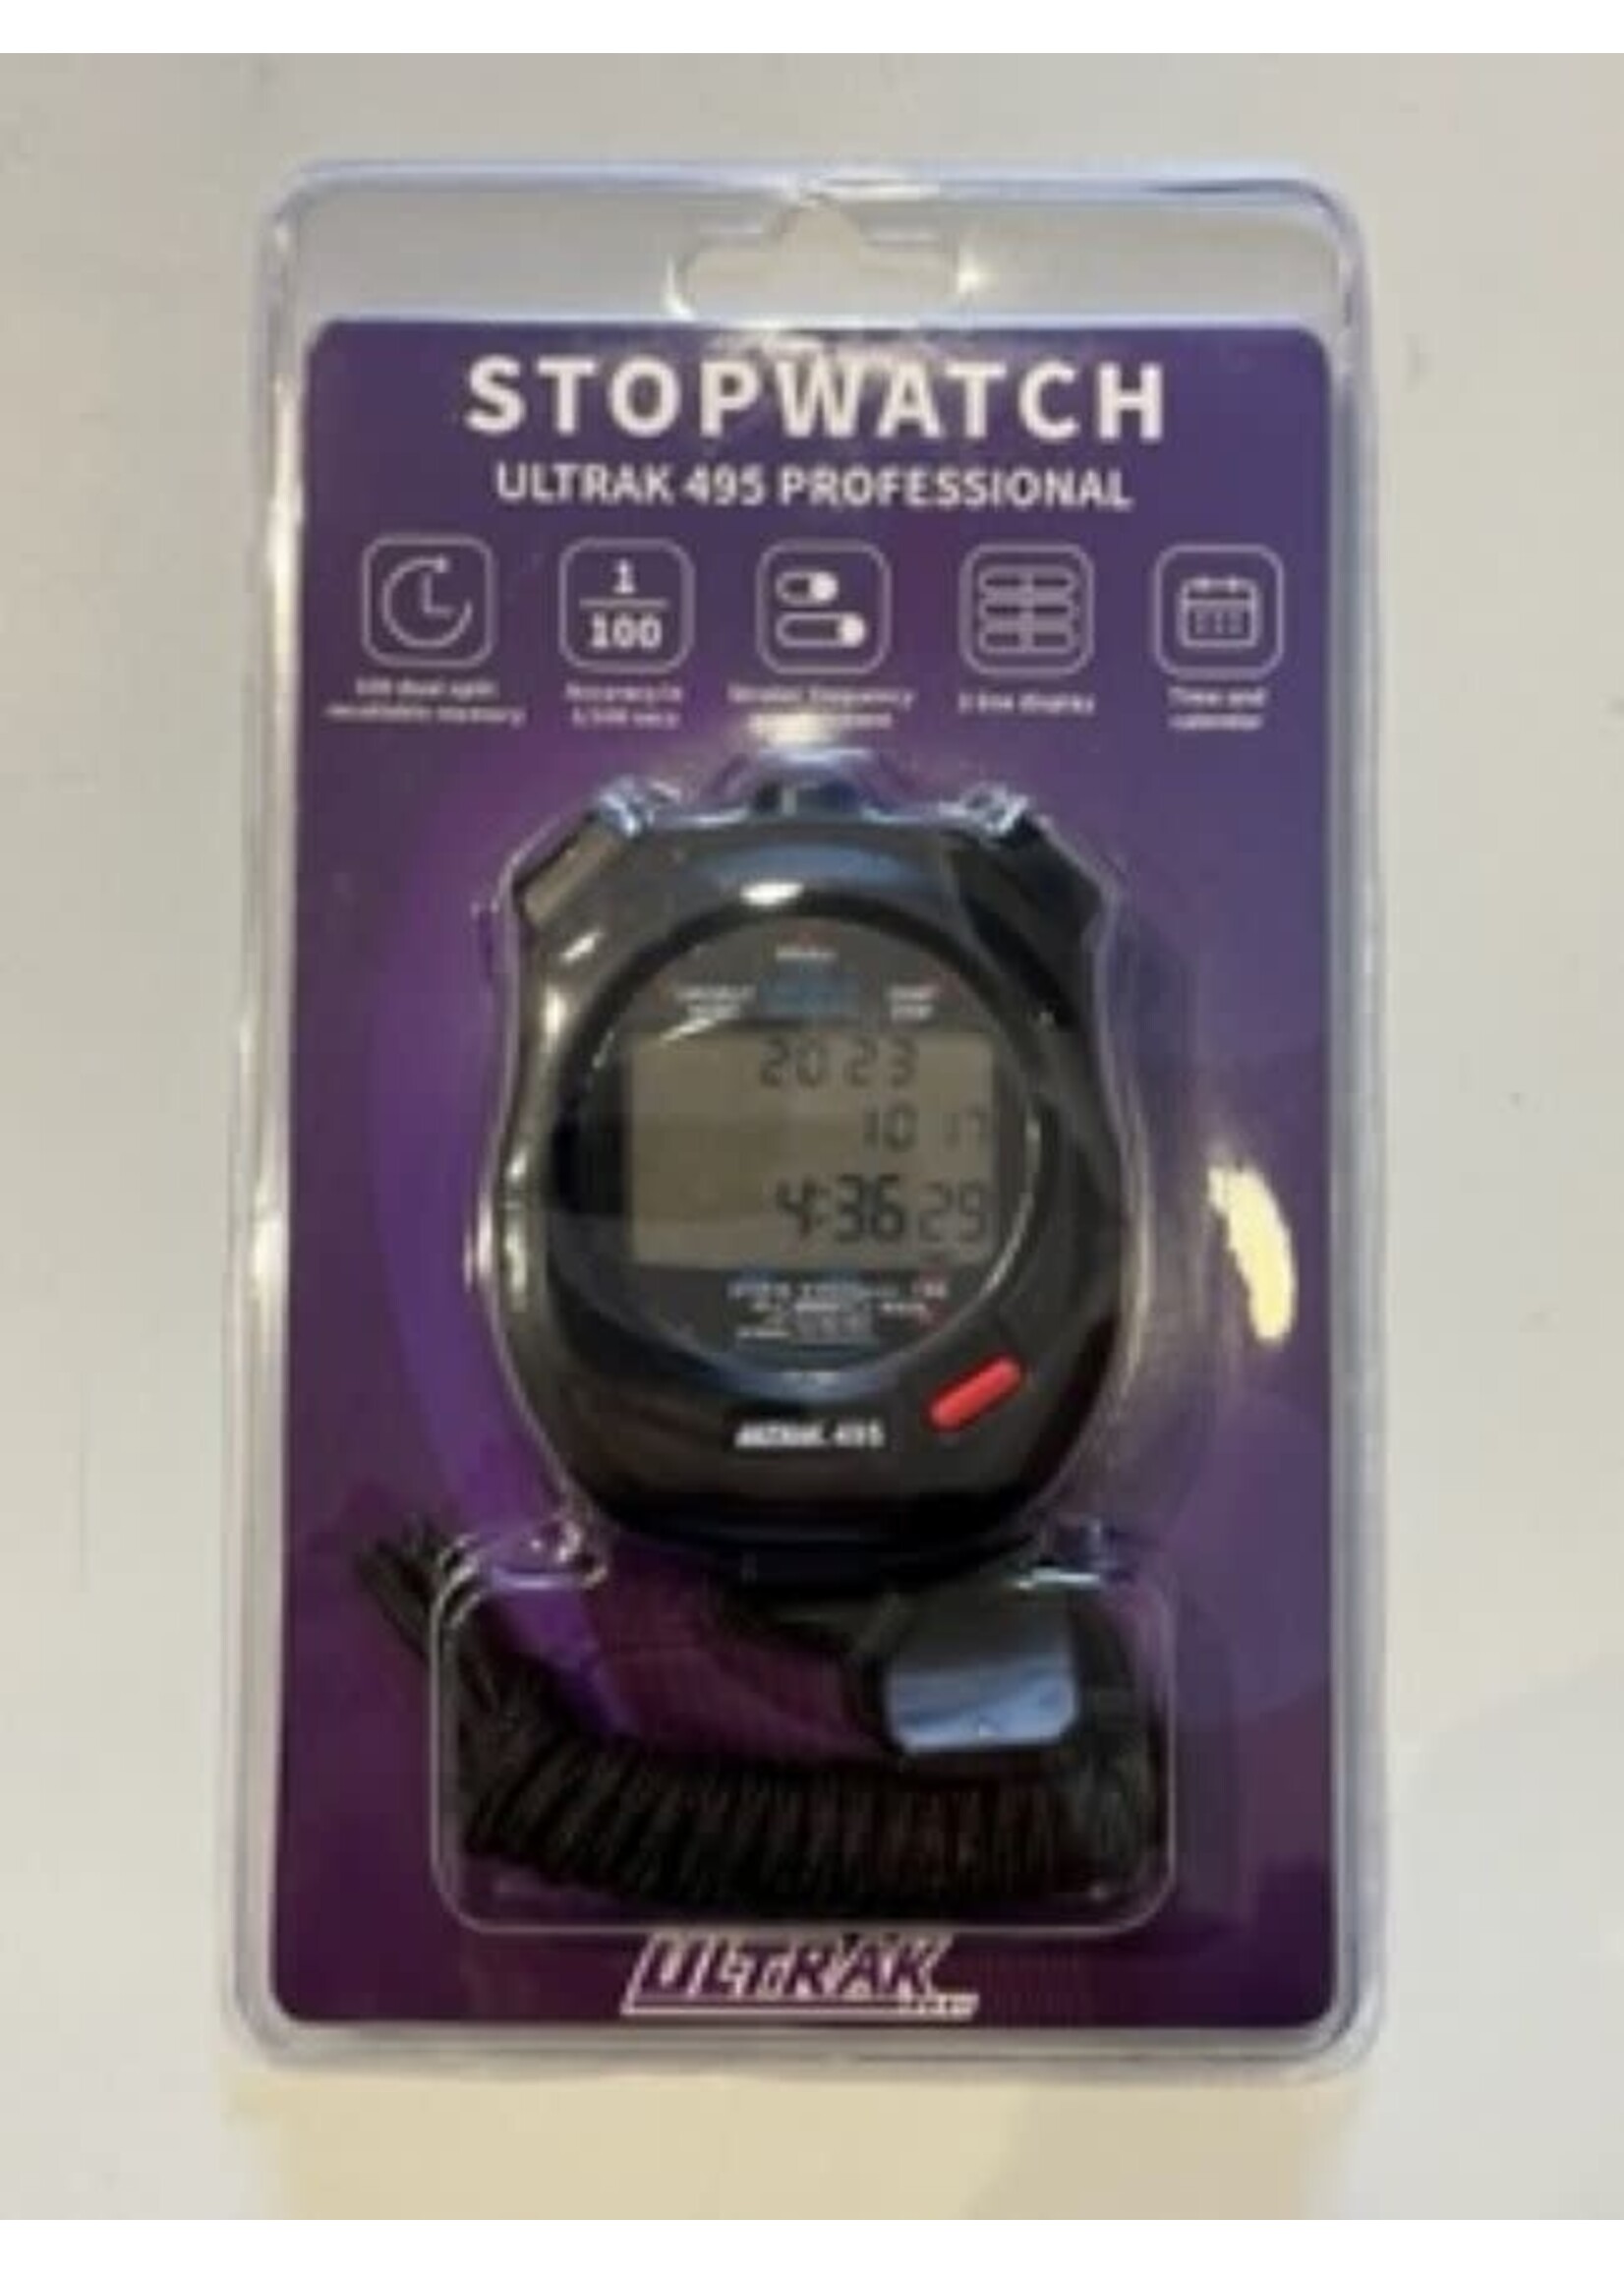 Amazon.com: Mechanical Stop Watch, Digital Sports Stopwatch Timer, SXJ504  Sports Stopwatch Timer with Storage Box for Sports Referee Count Timer,  Handheld Sports Chronograph for Sports Coaches Fitness : Sports & Outdoors